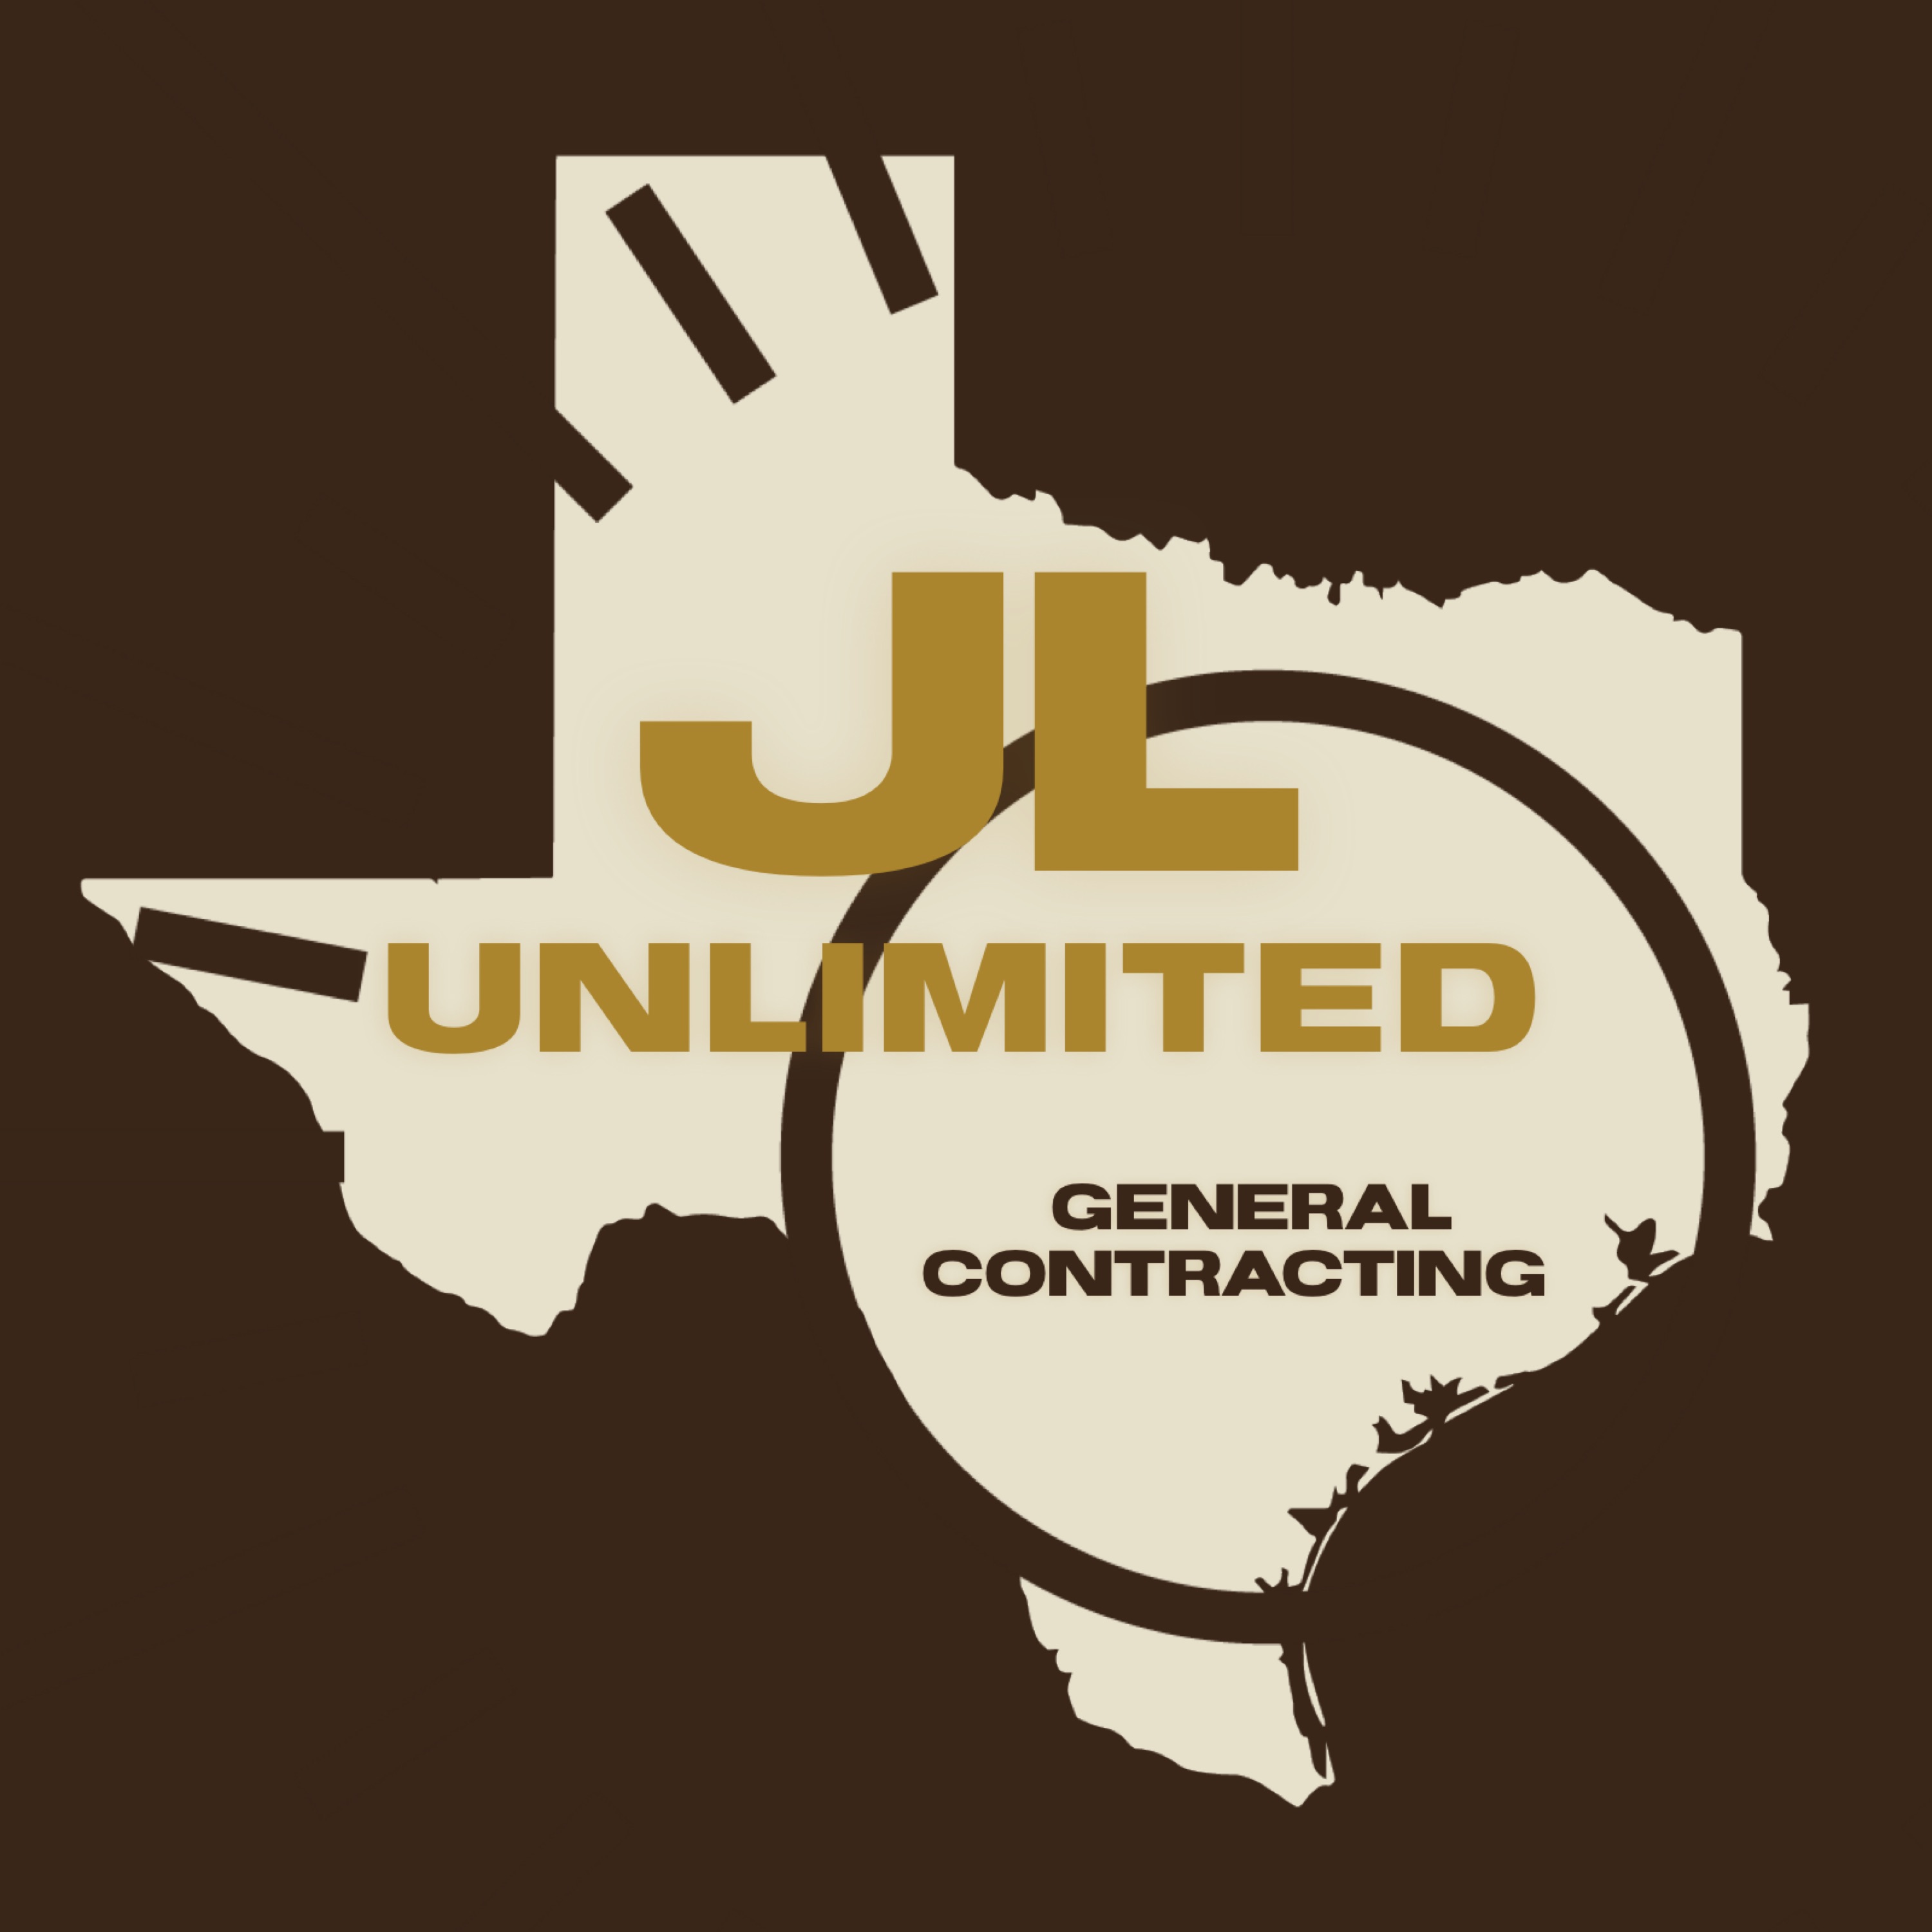 JL Unlimited General Contracting Logo